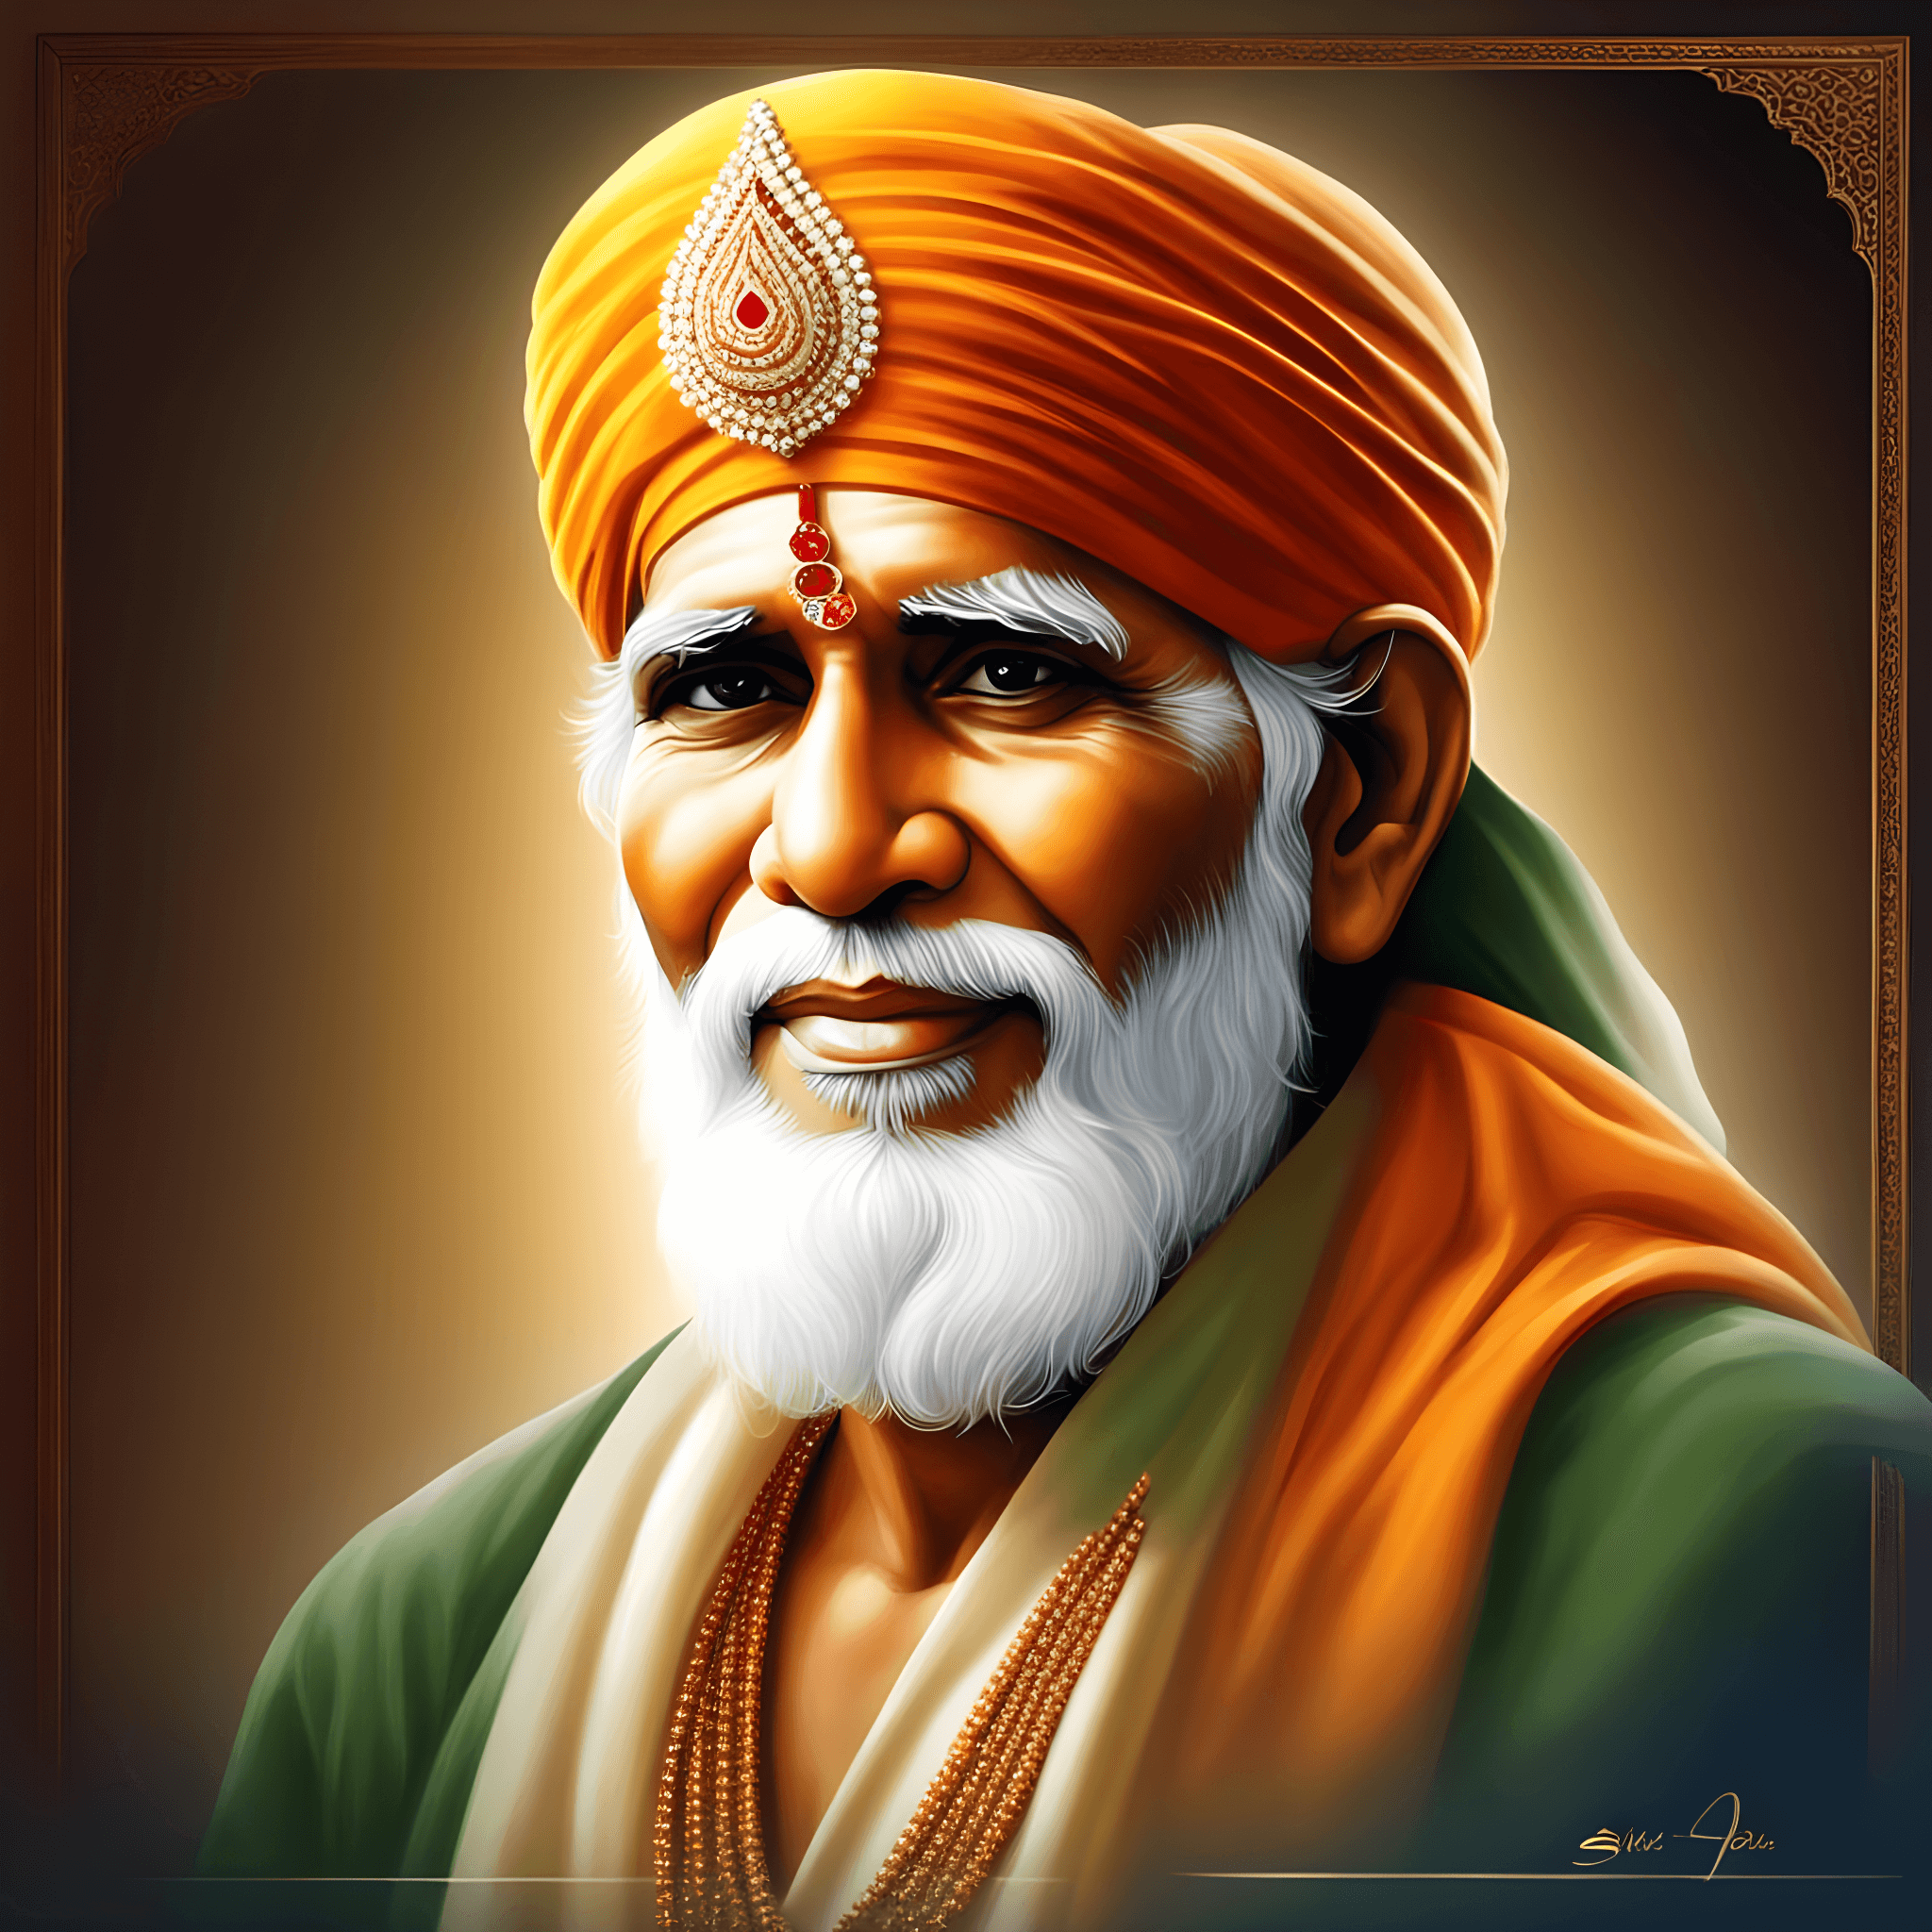 i-want-to-create-a-single-image-of-shirdi-and-in-this-image-i-want-to-put-sai-baba-photos-in-this-image-but-not-shows-sai-easily-in-that-photo-need-some-effort-to-find-sai-baba-image-in-that-frame